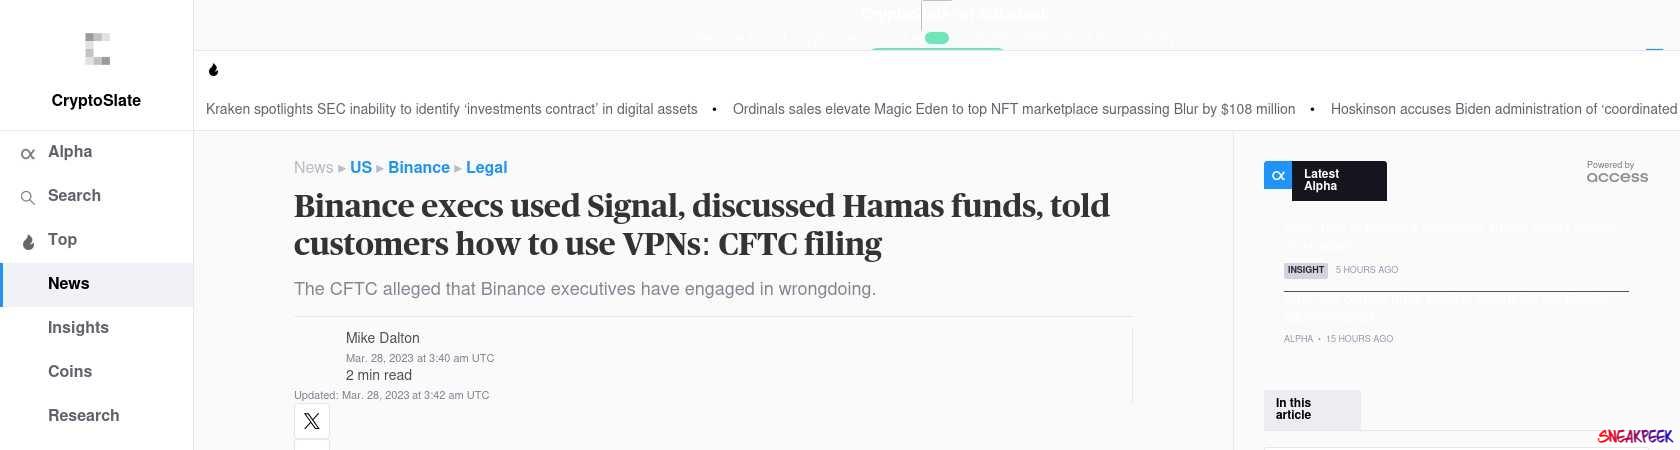 Read the full Article:  ⭲ Binance execs used Signal, discussed Hamas funds, told customers how to use VPNs: CFTC filing